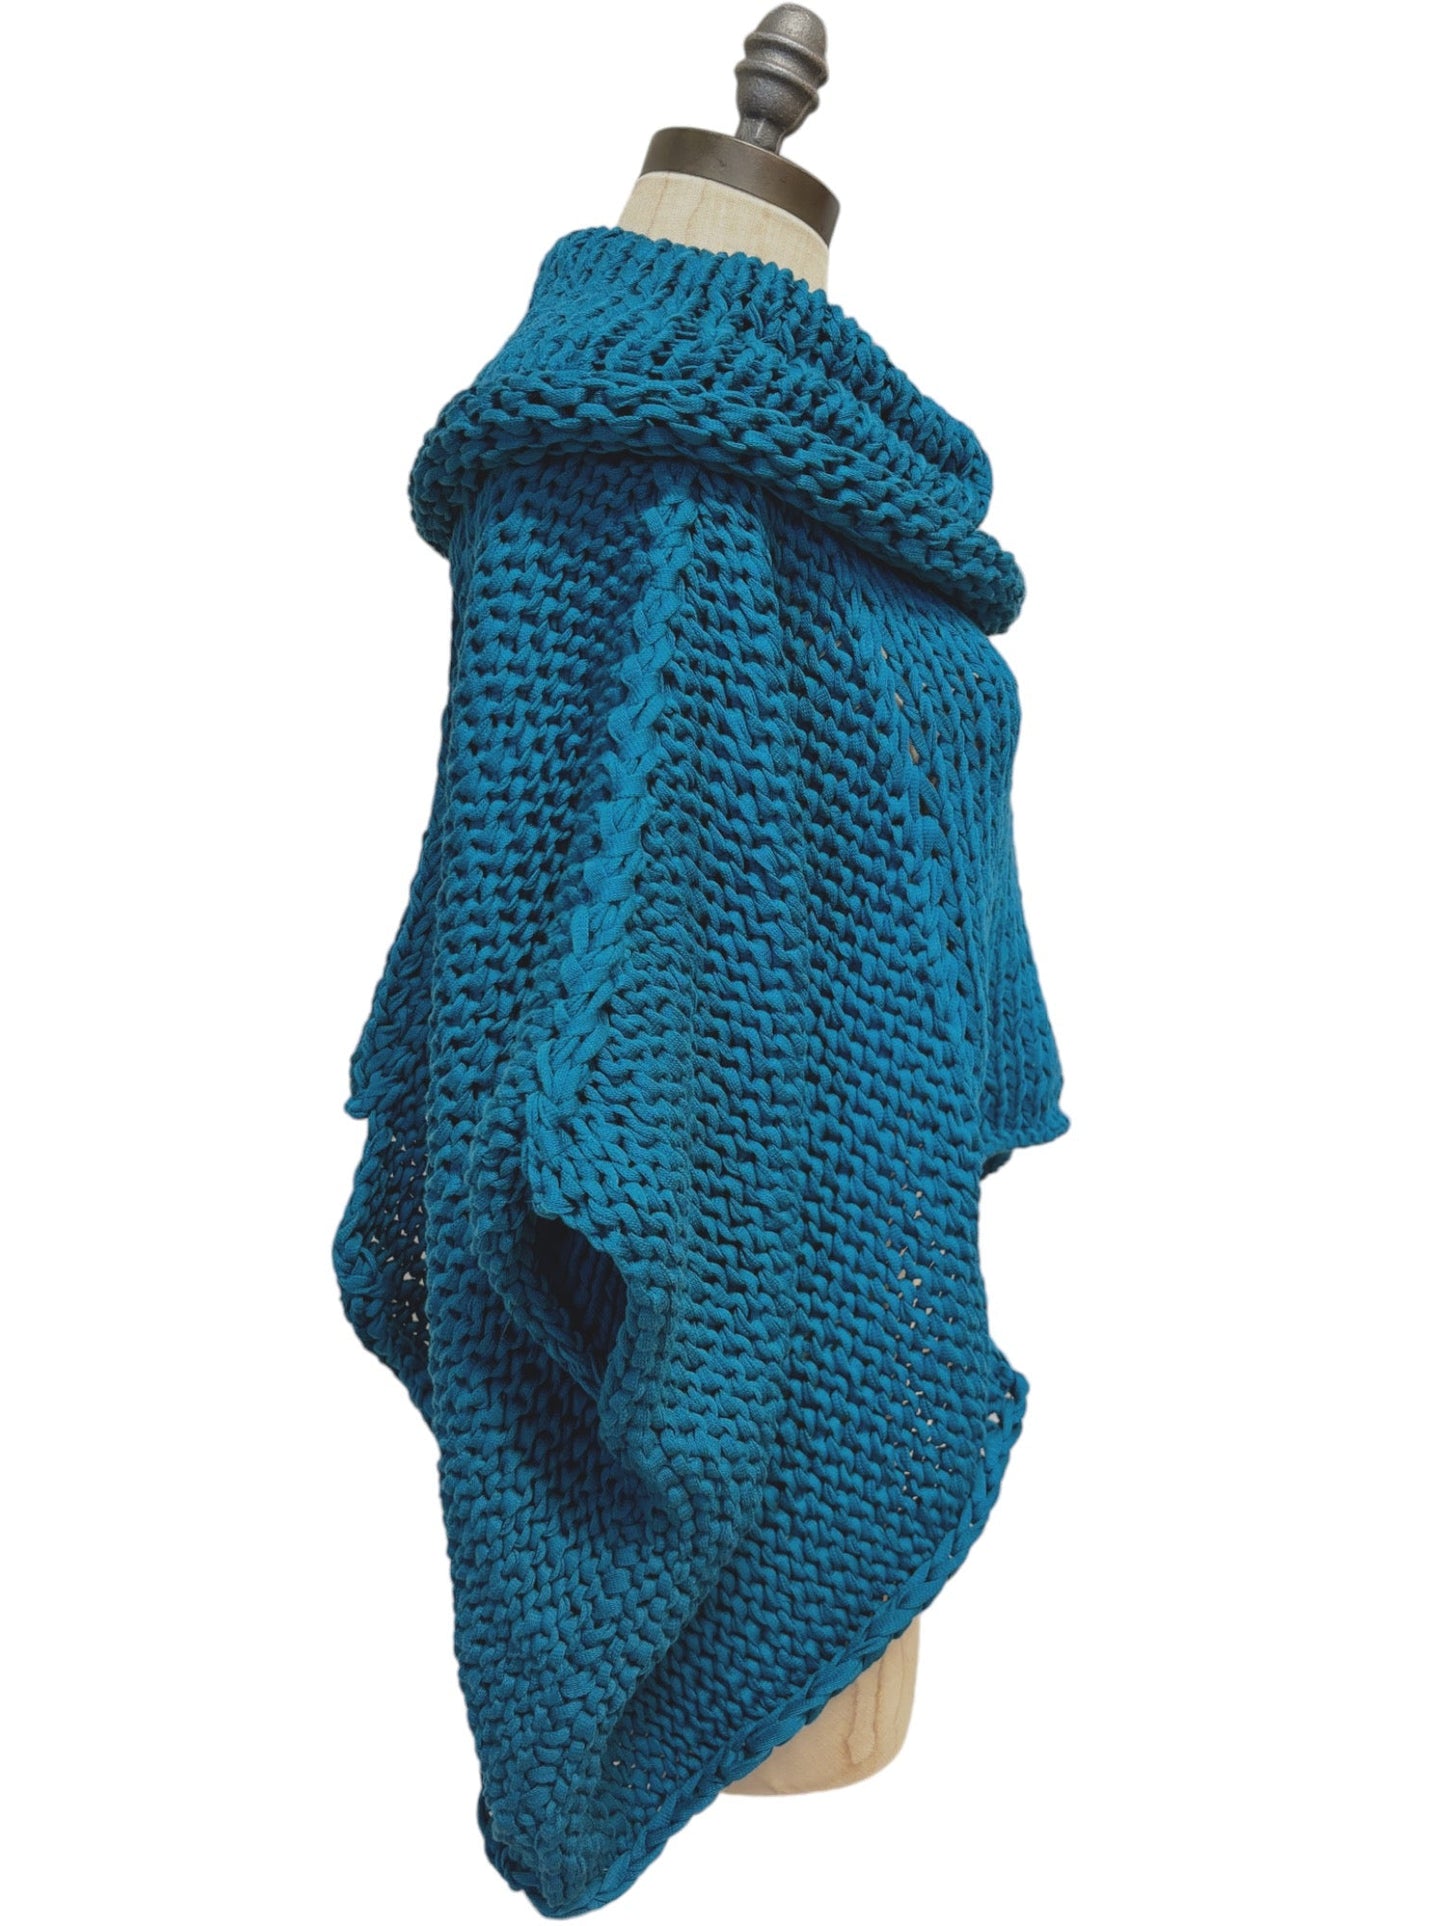 Cape Sweater in Turquoise